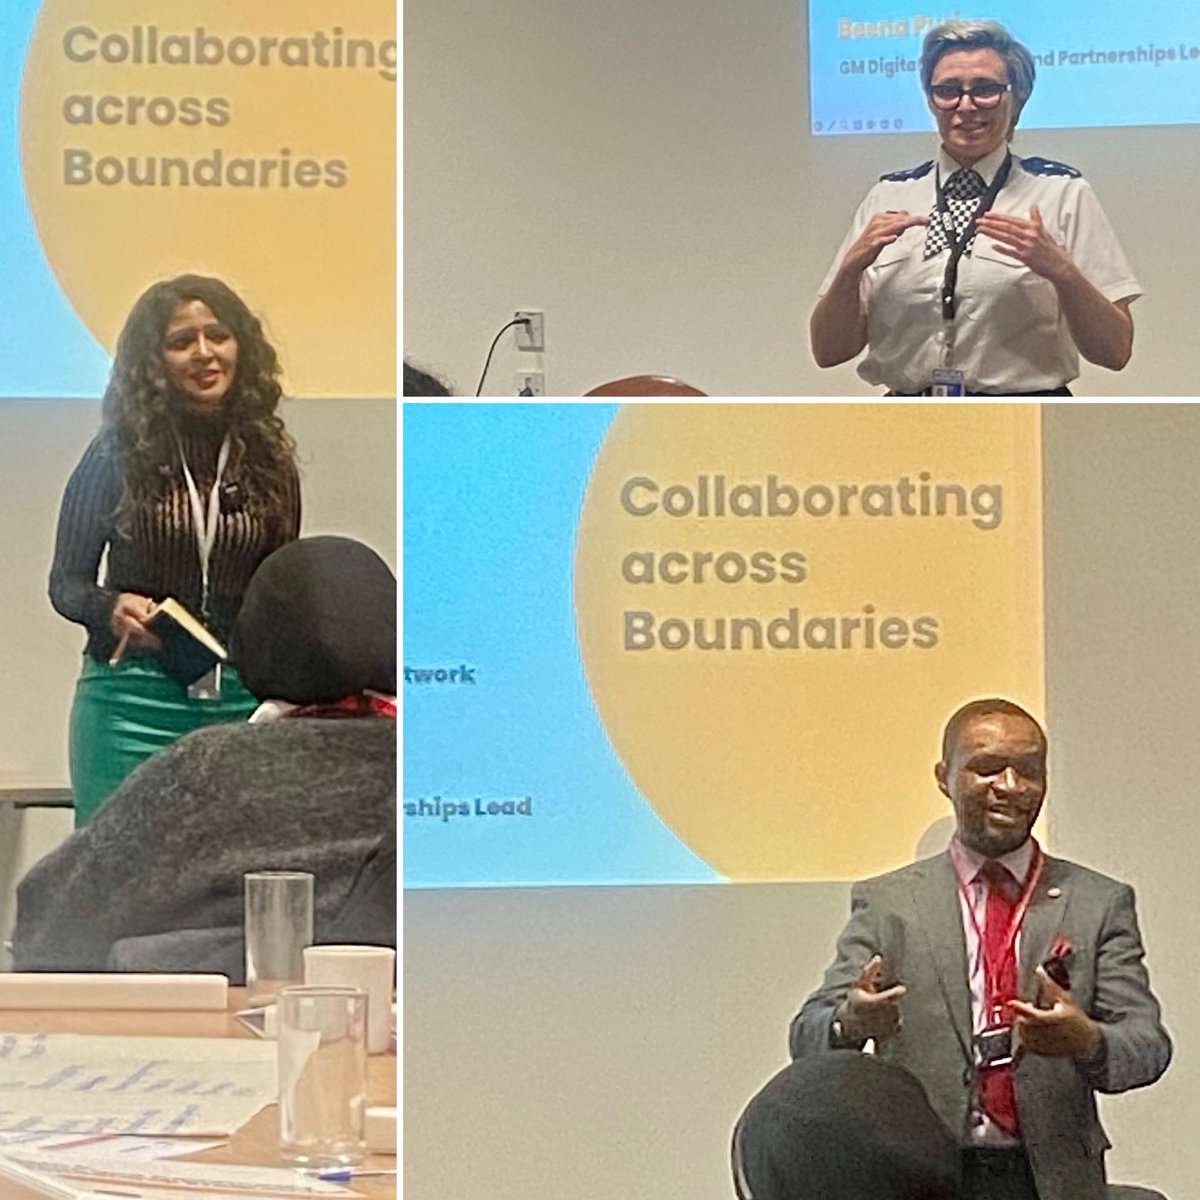 Fascinating, informative & inspiring hearing from the #WeLeadforLegacy panel sharing their experiences of building relationships to lead systems change. Thank you Emma Gilbert @gmpolice Beena Puri @buzzinbee3 & Charles Kwaku-Odoi @charleskod for sharing your leadership journeys.